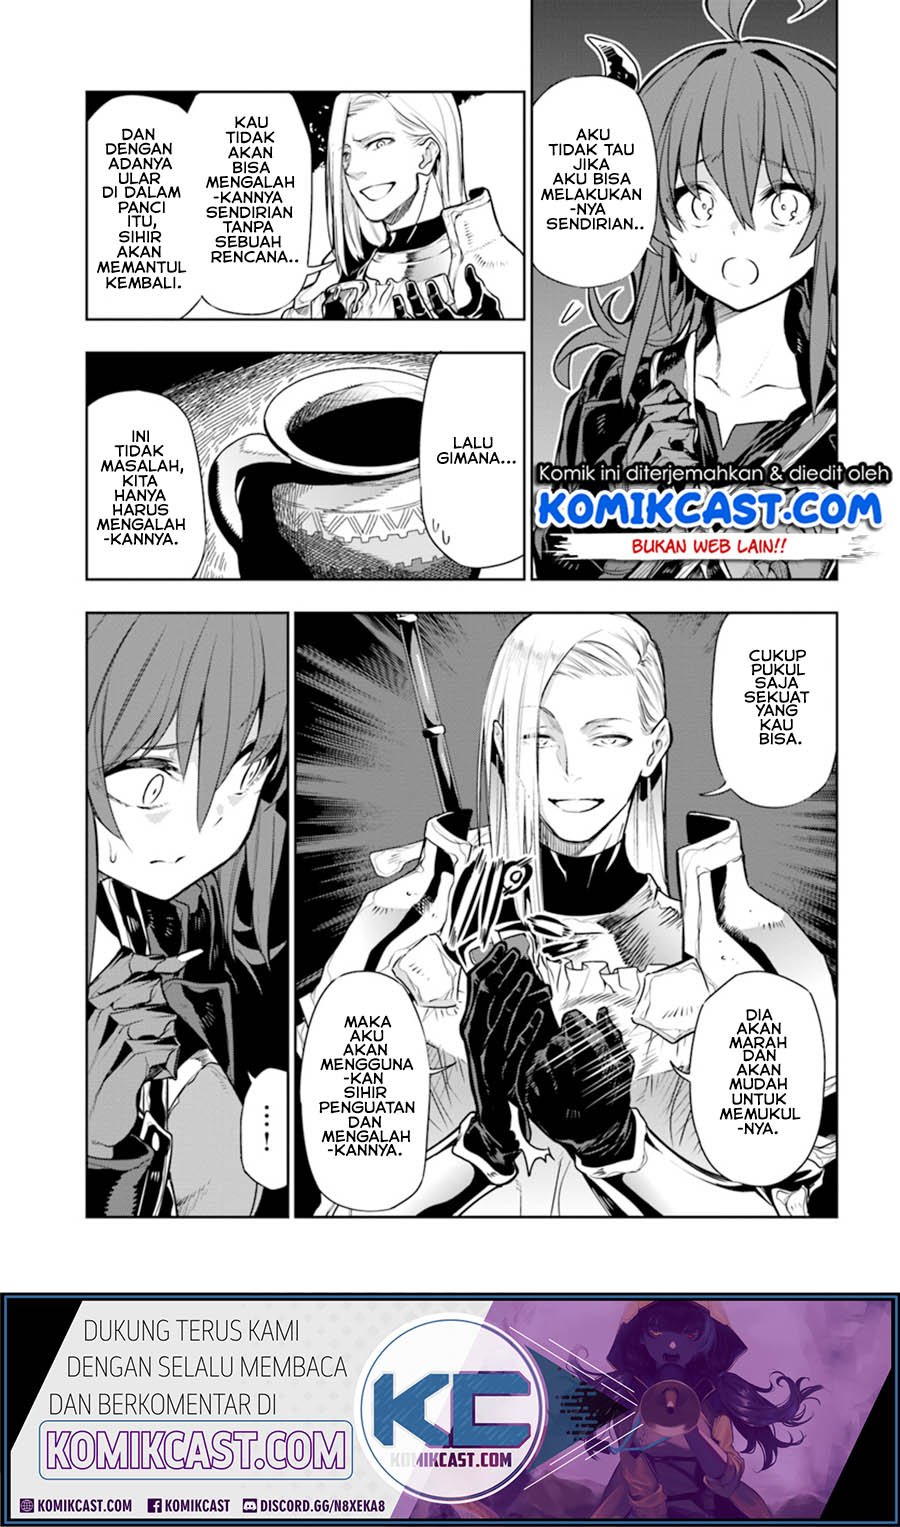 The Adventurers That Don’t Believe In Humanity Will Save The World Chapter 07